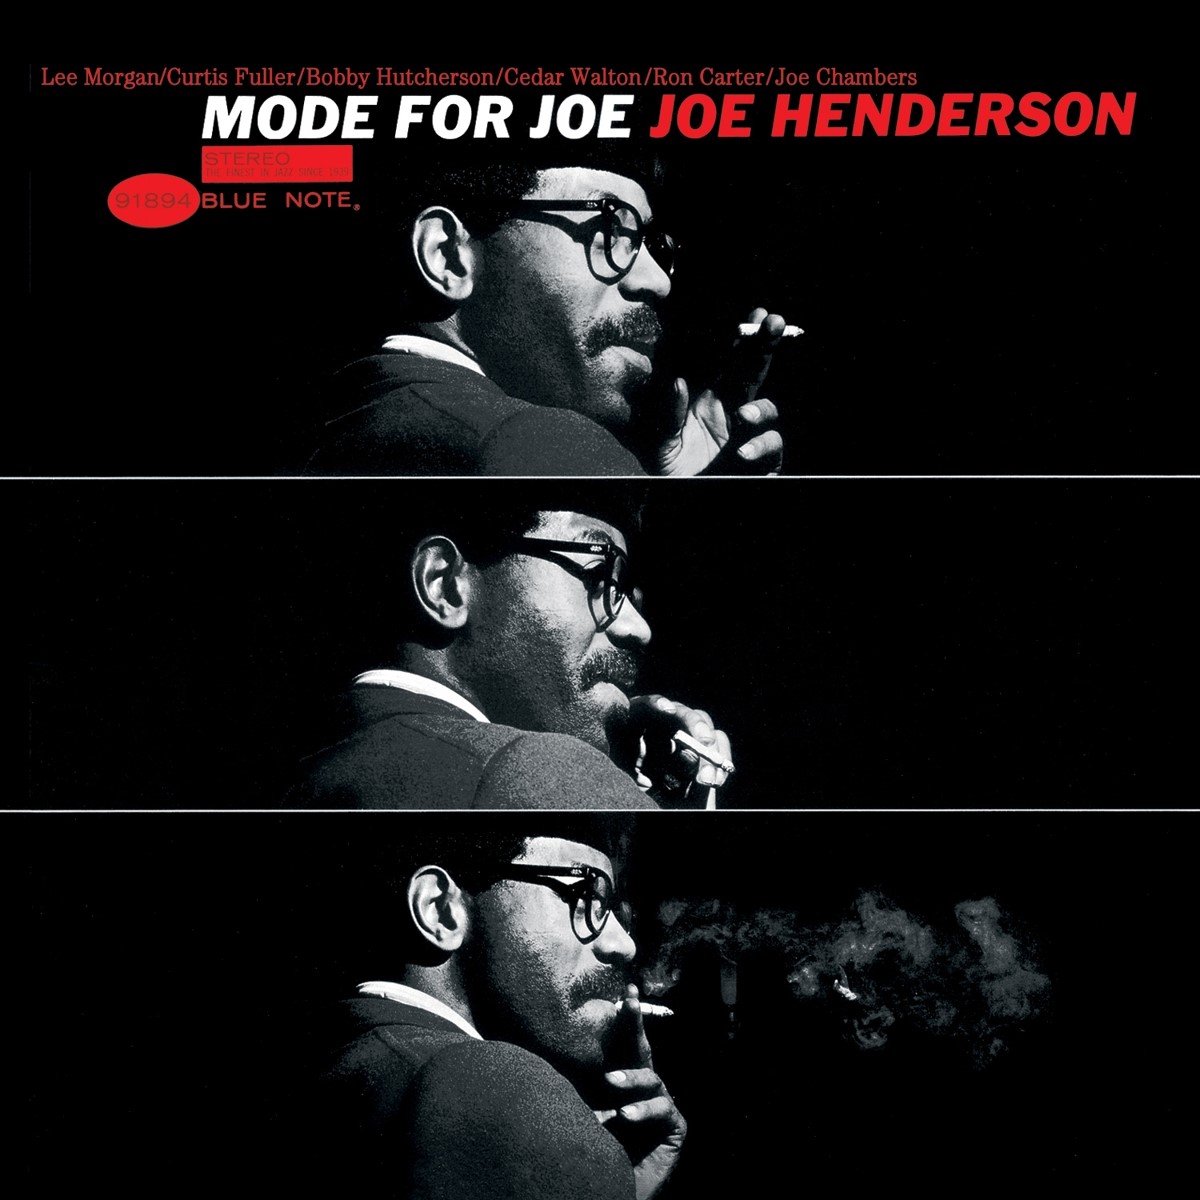 Джаз Blue Note (USA) Joe Henderson - Mode For Joe (Black Vinyl LP) 100m scapc g657a1 indoor single mode fiber patch cord ftth drop cable with steel wire black lszh jacket